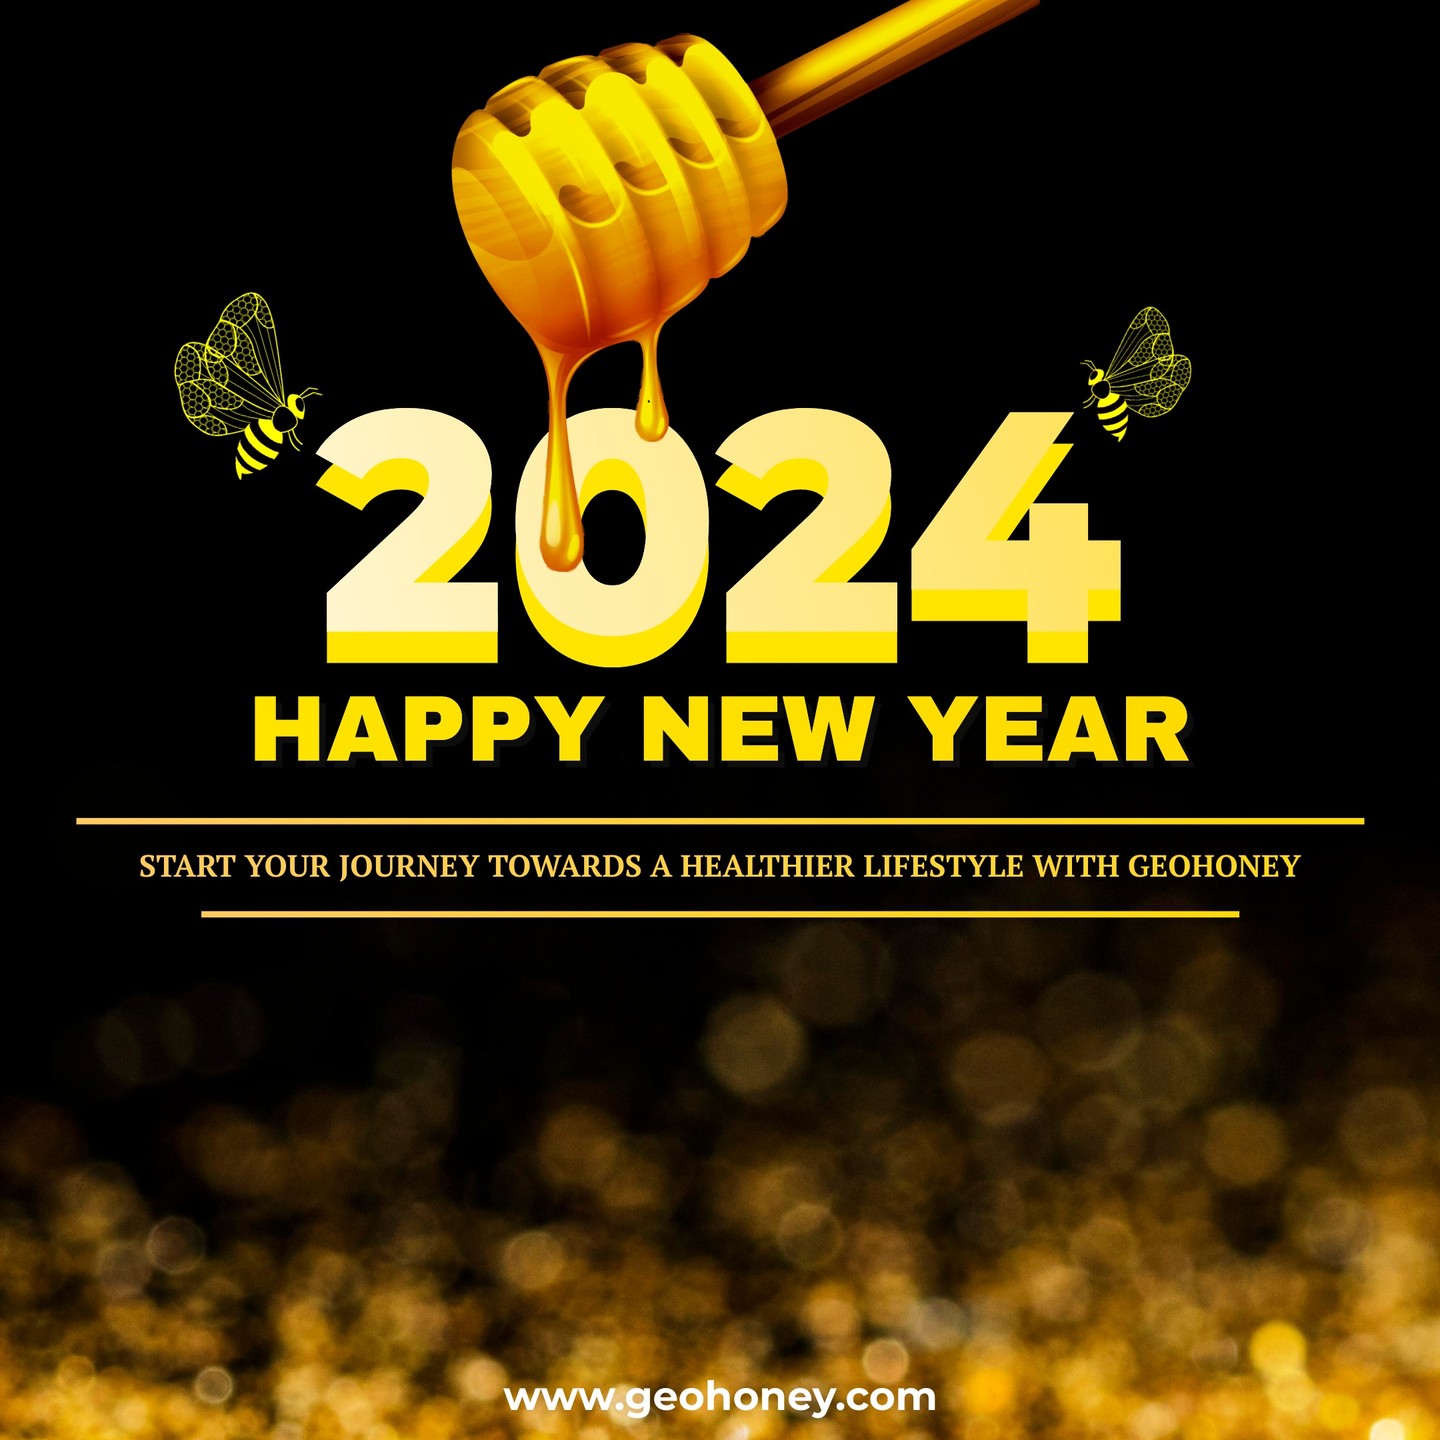 May the sweetness of the past year linger and the New Year bring a harvest of joy, health, and prosperity to all! Happy New Year from Geohoney! ????✨ 

#sweetbeginnings #newyearwishes #newyear #2024 #newyear2024 #happynewyear2024 #geohoneylovers